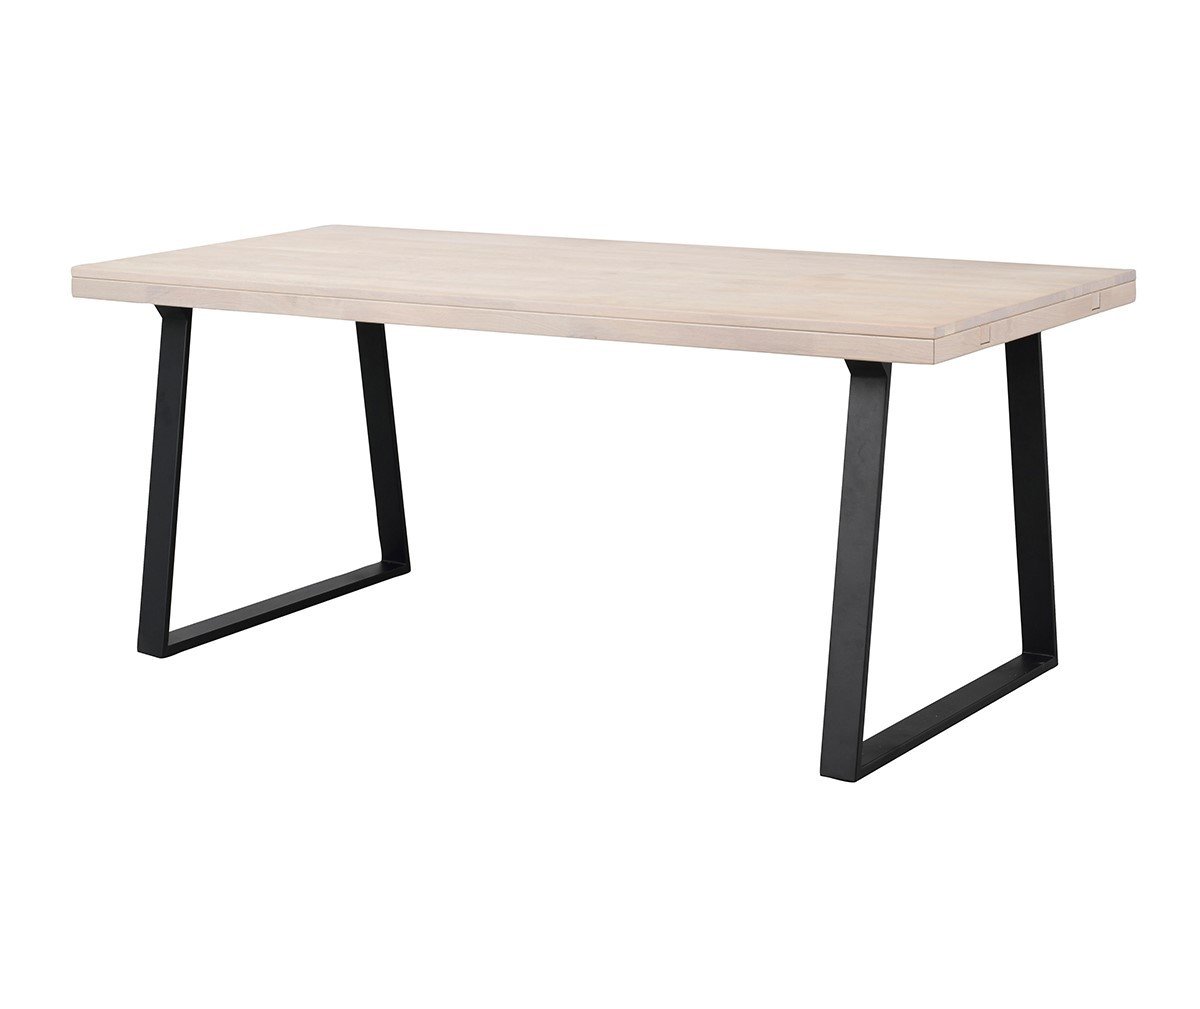 Rowico Brooklyn Extendable Dining Table White Oiled Oak / Metal, 95 x 170 cm